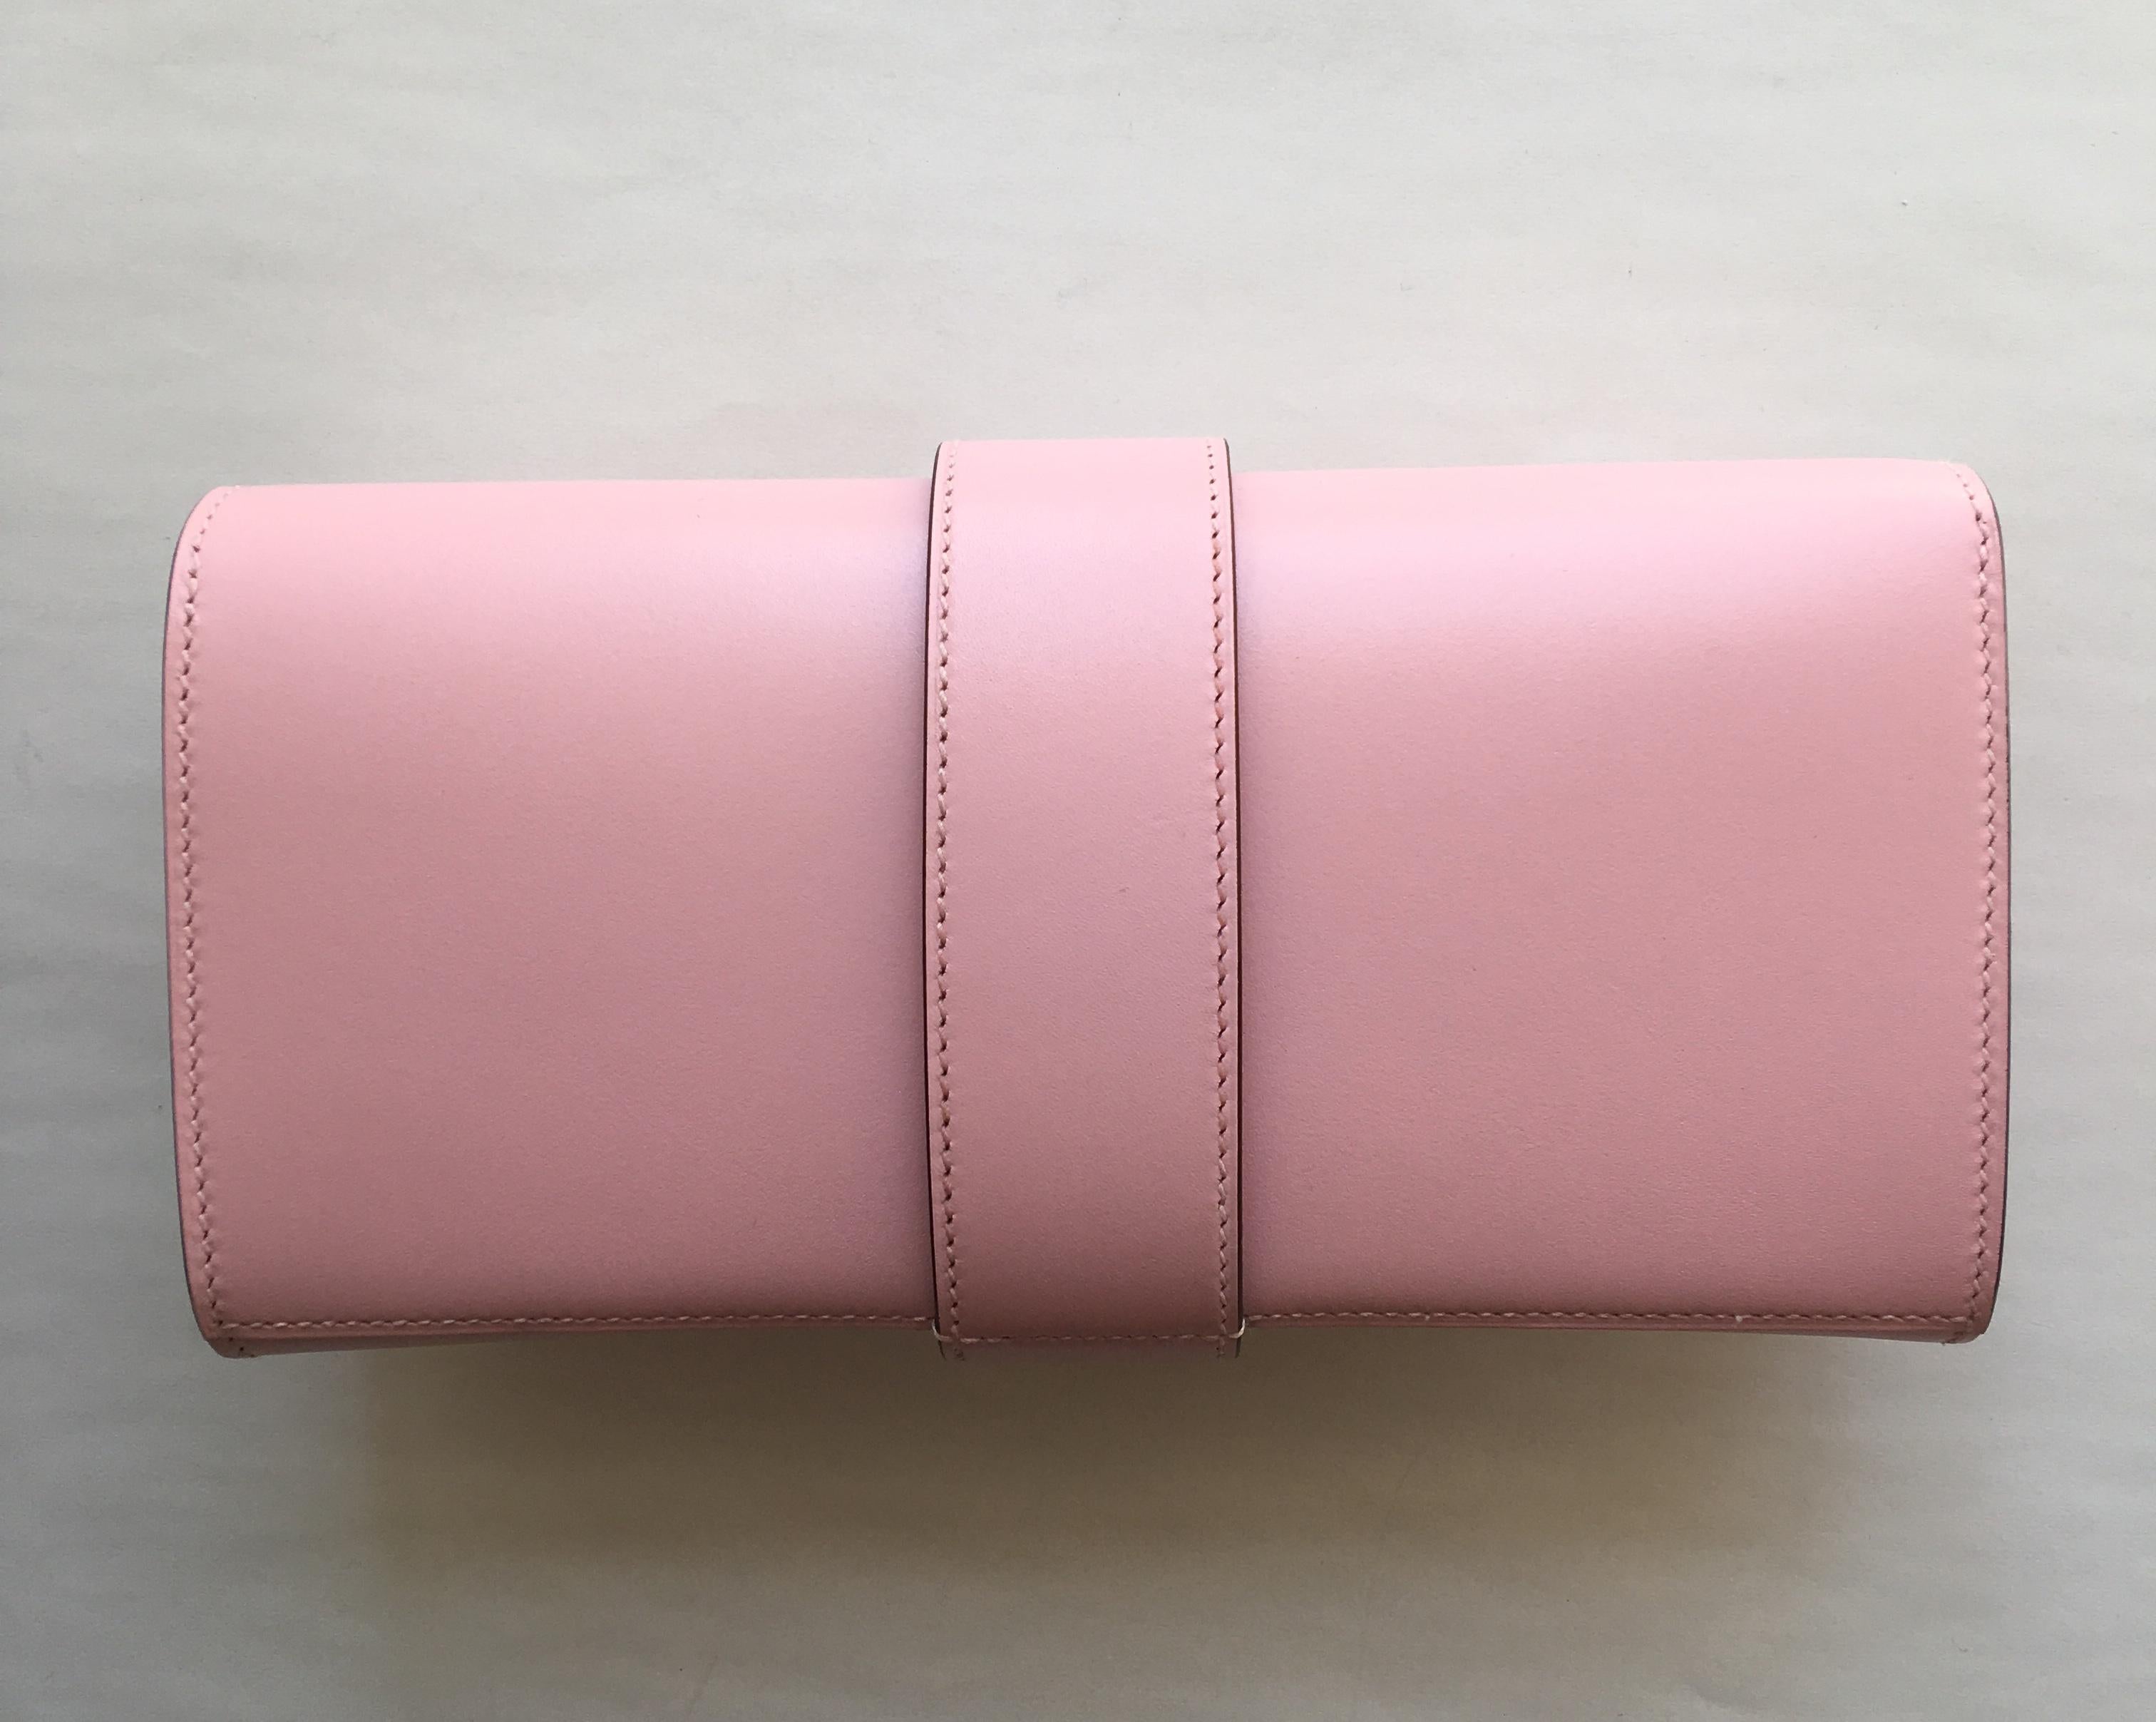 Featuring the distinctive Collier de Chien hardware which allows the bag to be made smaller or wider as necessary, the Medor Clutch is a simple design made special by its distinctive, eye-catching and bold hardware. It is a compact clutch that fits